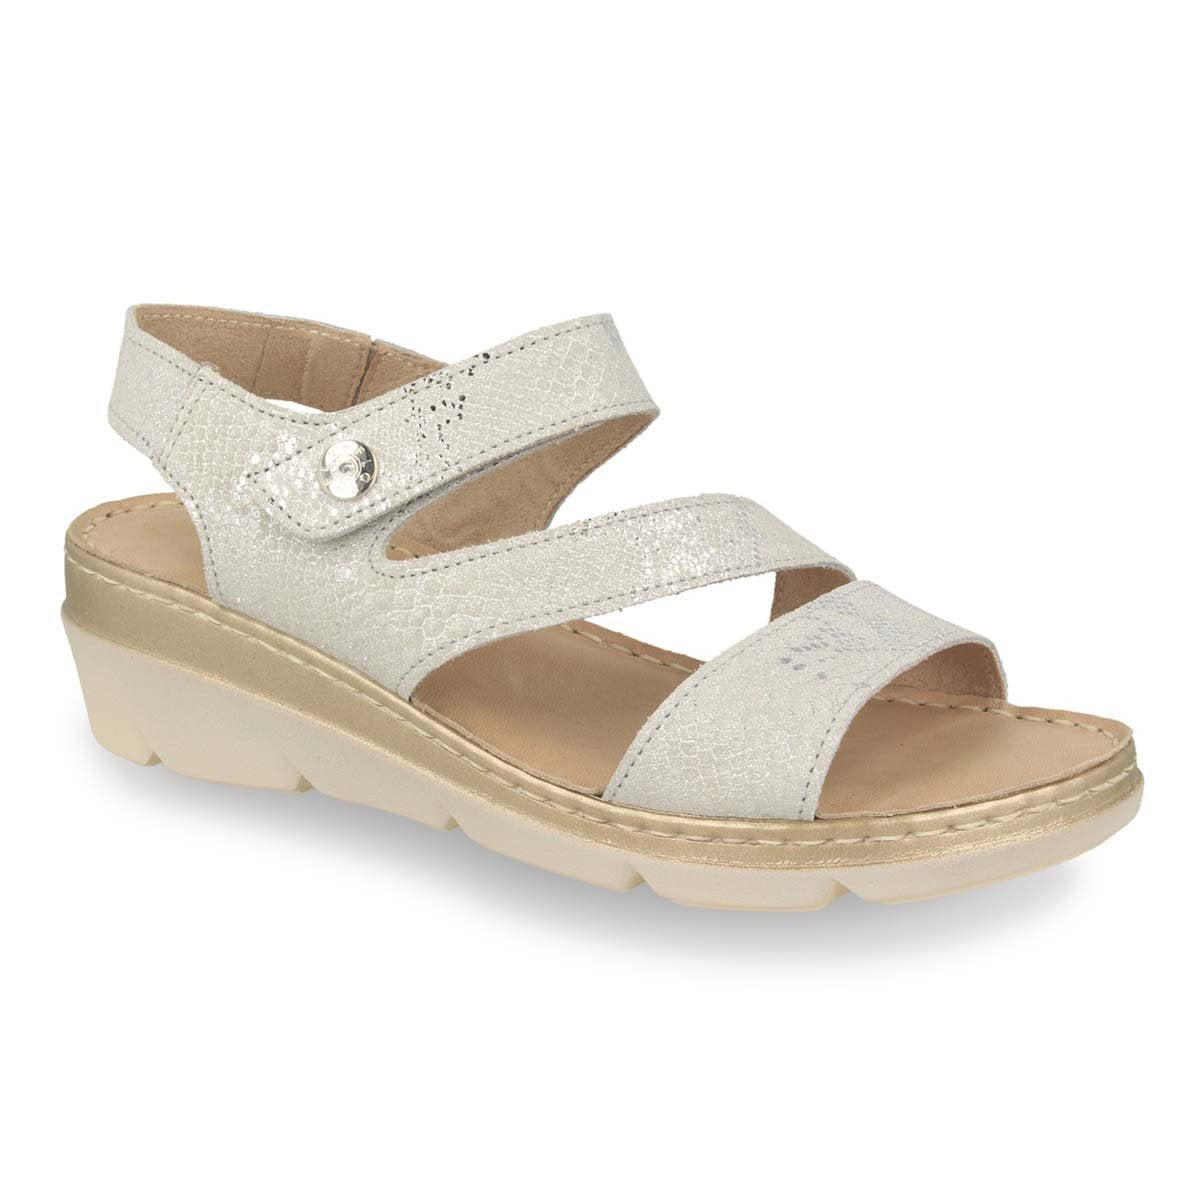 See the Velcro Leather Strappy Back Strap Women Sandals in the colour BEIGE, available in various sizes